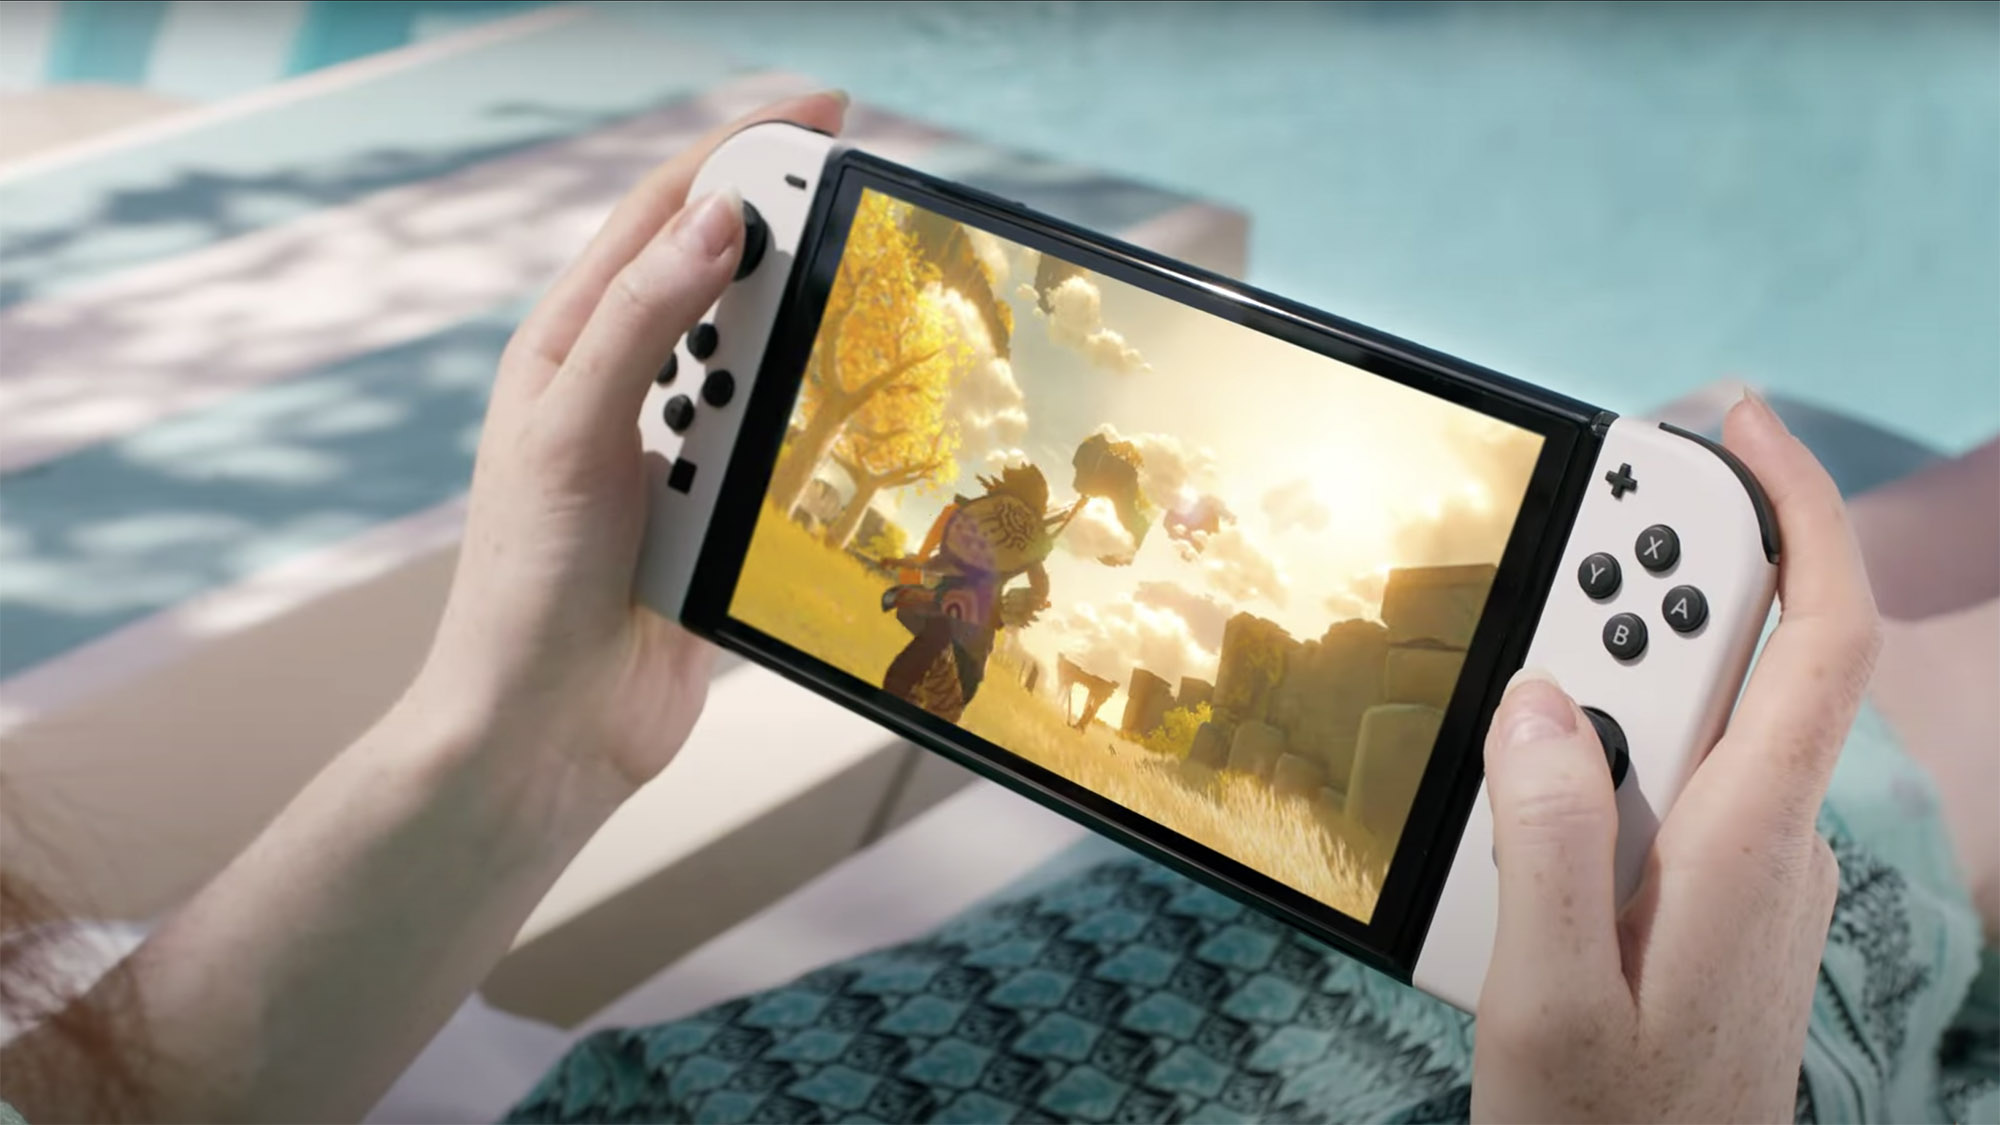 Get a Discounted Nintendo Switch OLED with Splatoon 3 and 2nd